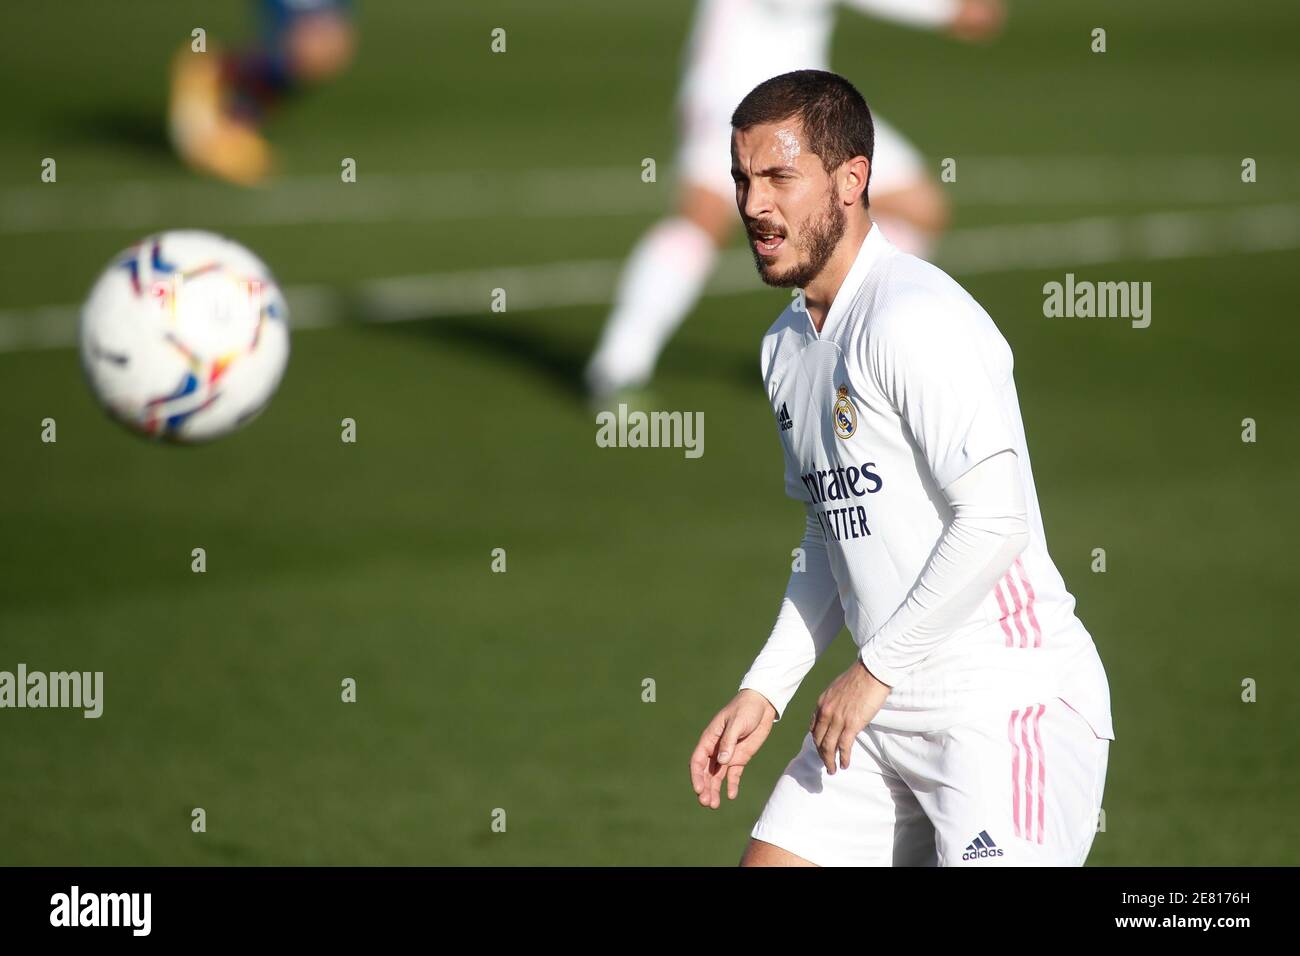 Eden Hazard of Real Madrid during the spanish league, La Liga Santander, football match played between Real Madrid and Levante UD at Ciudad Deportiva Real Madrid on january 30, 2021, in Valdebebas, Madrid, Spain. / LiveMedia Stock Photo